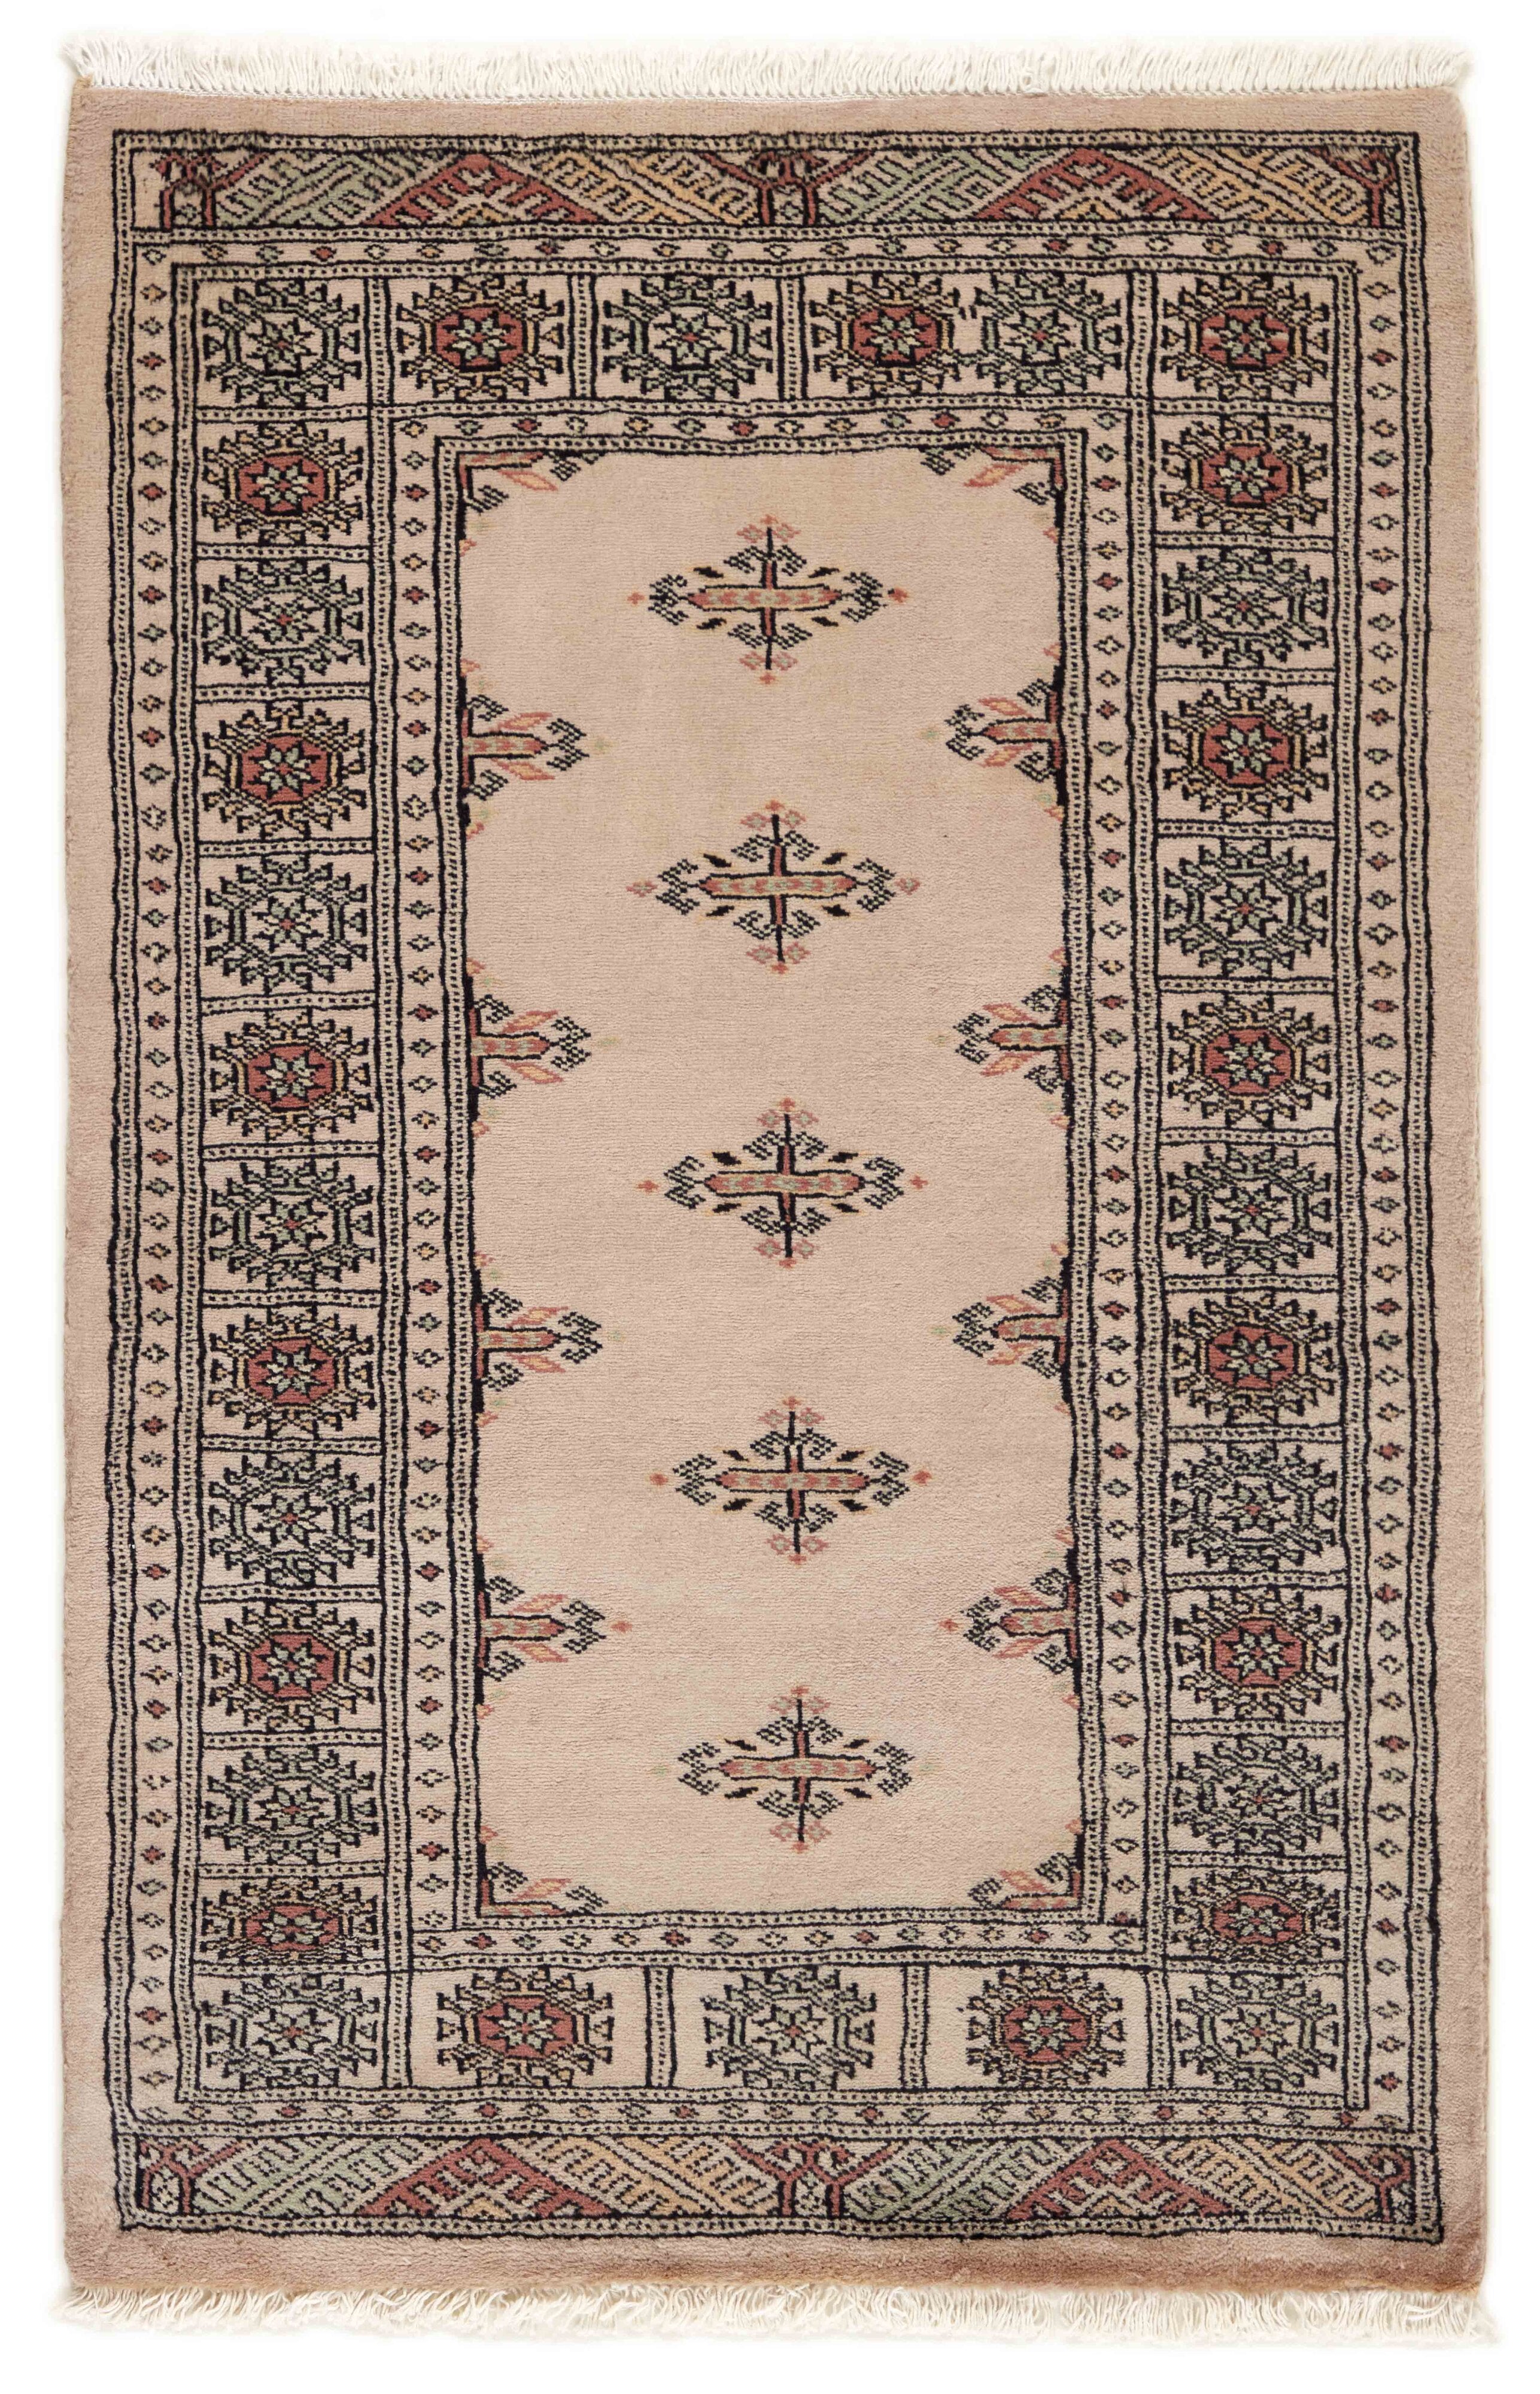 Beige Oriental rug with traditional bordered pattern